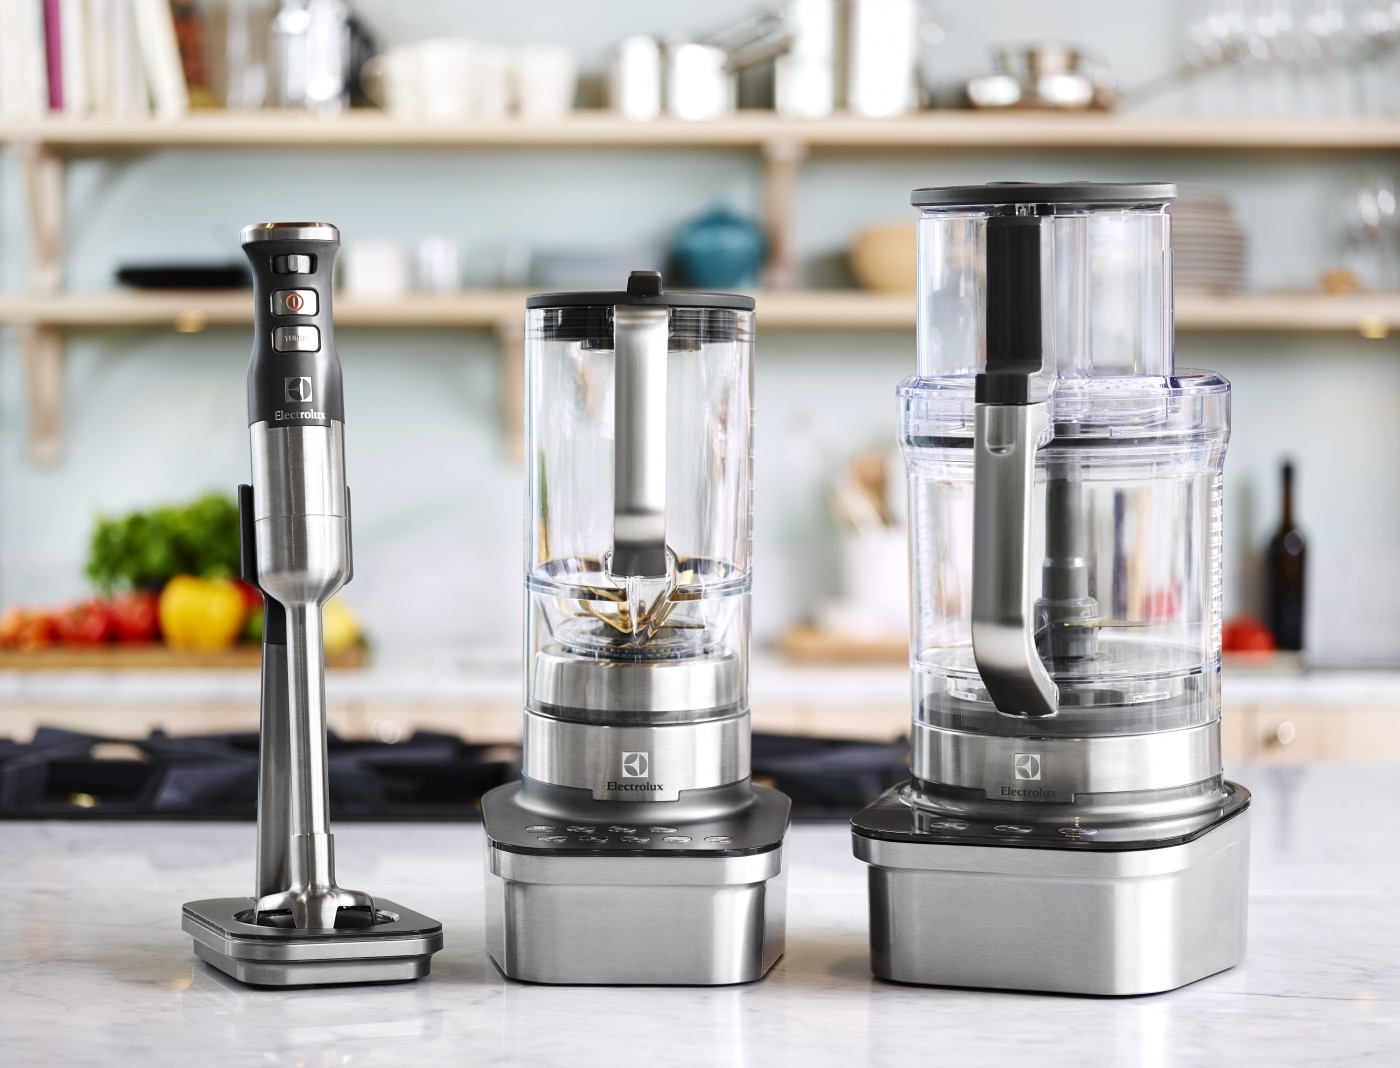 Innovative meets stunning design in new Electrolux kitchen tools Electrolux Group